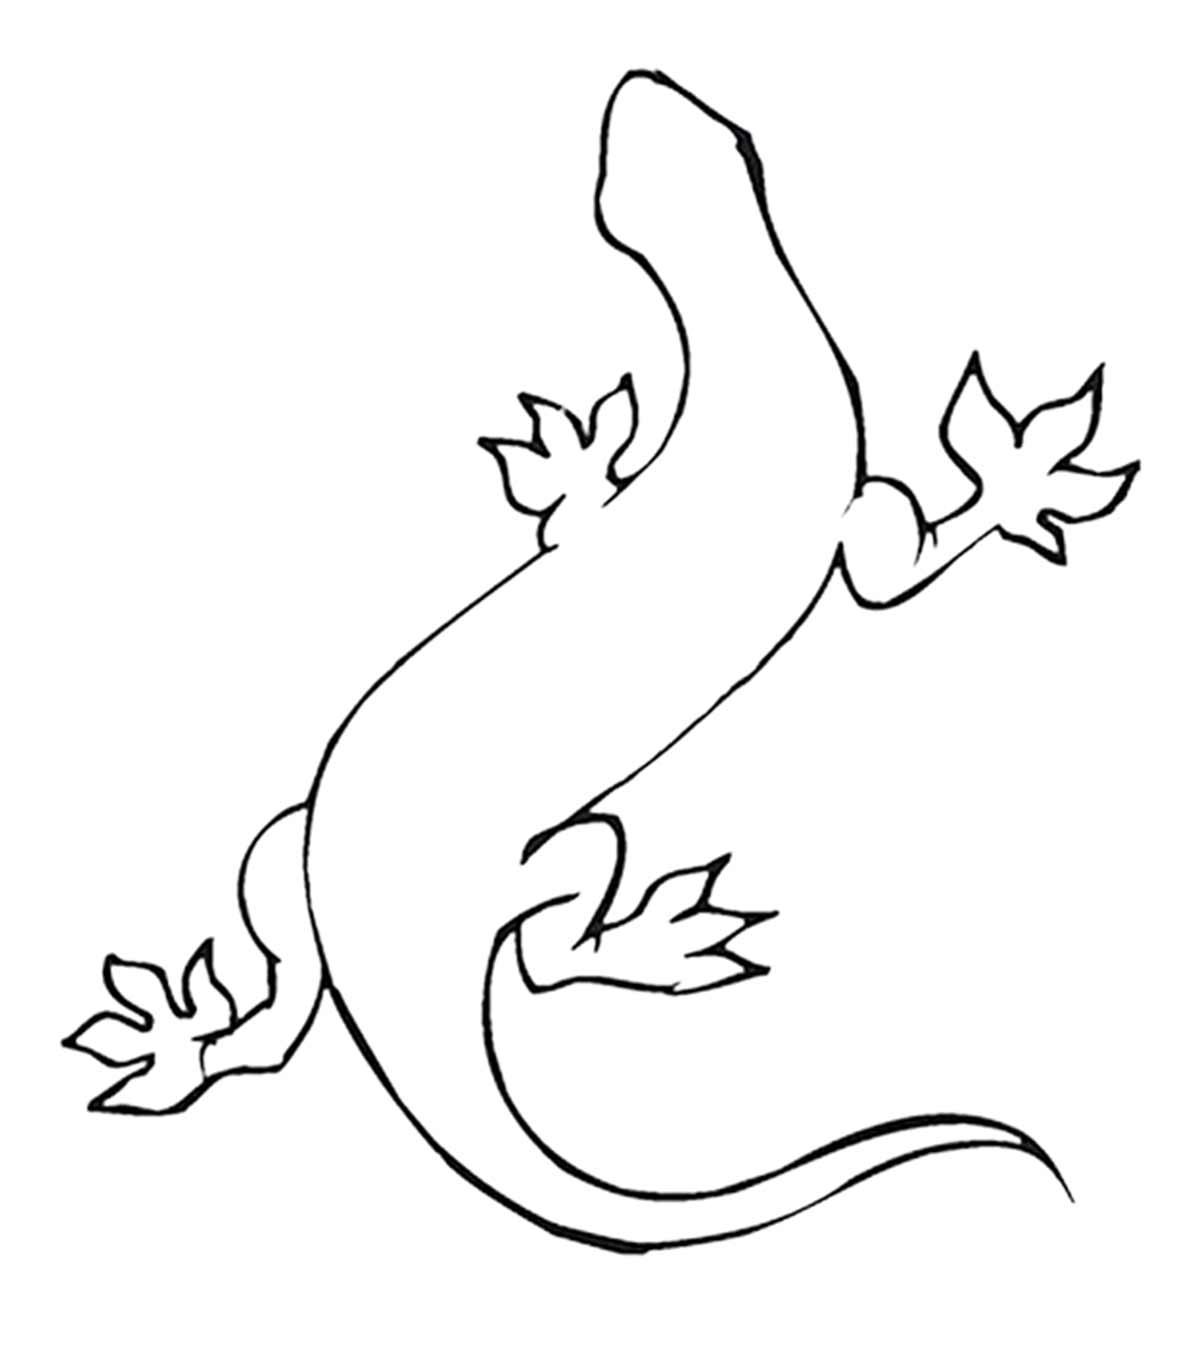 Top 10 Lizard Coloring Pages For Your Little Ones